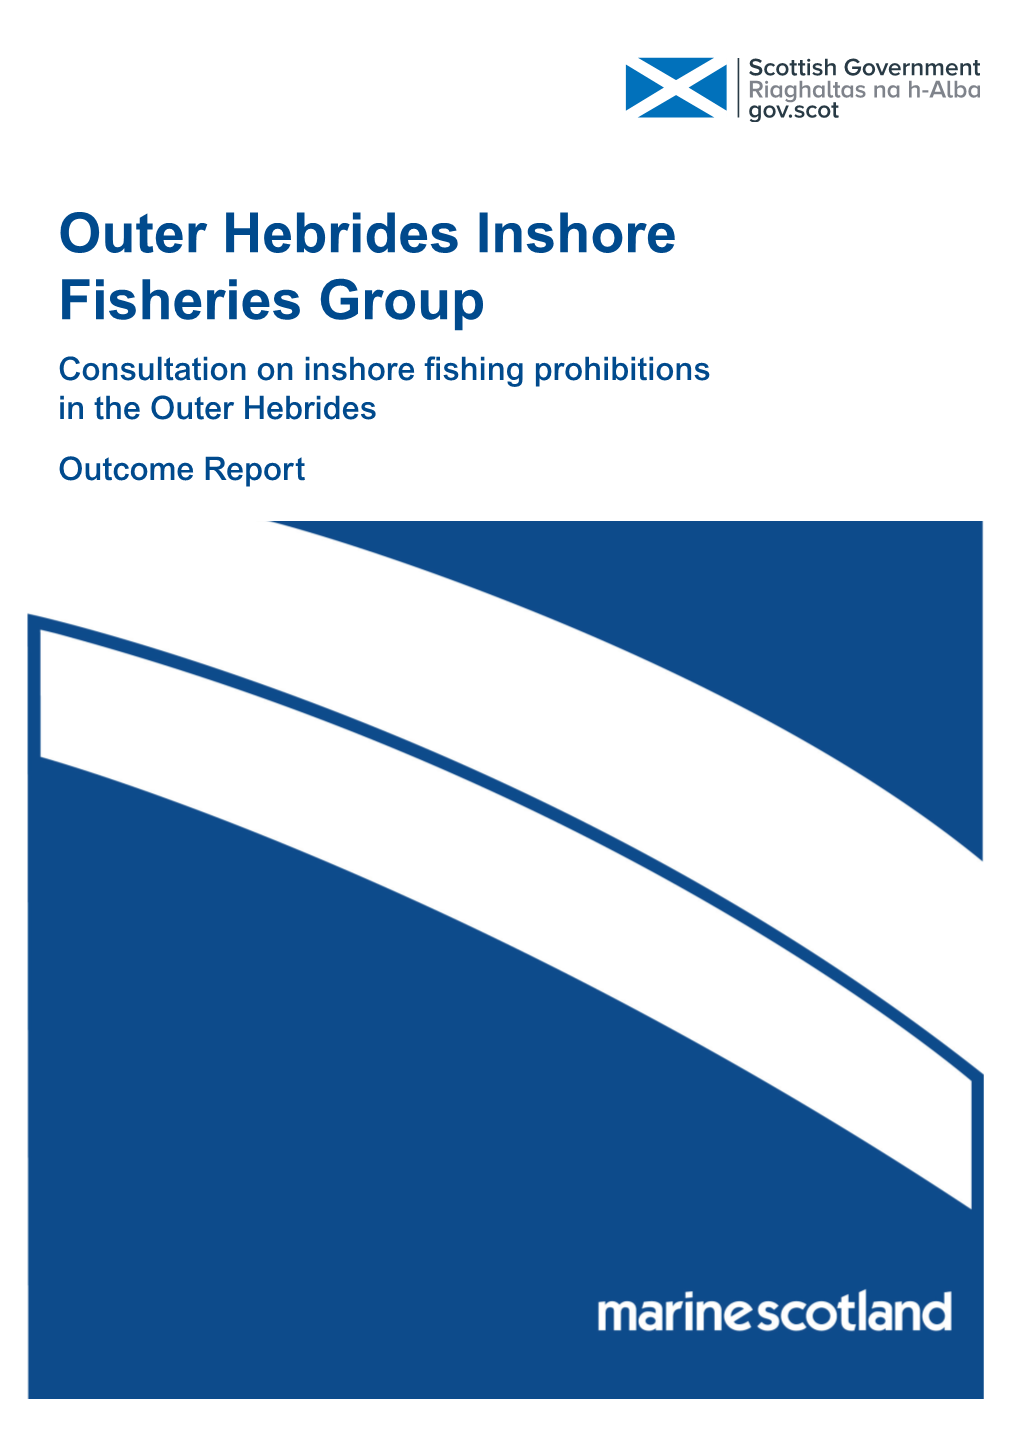 Consultation on Inshore Fishing Prohibitions in the Outer Hebrides Outcome Report